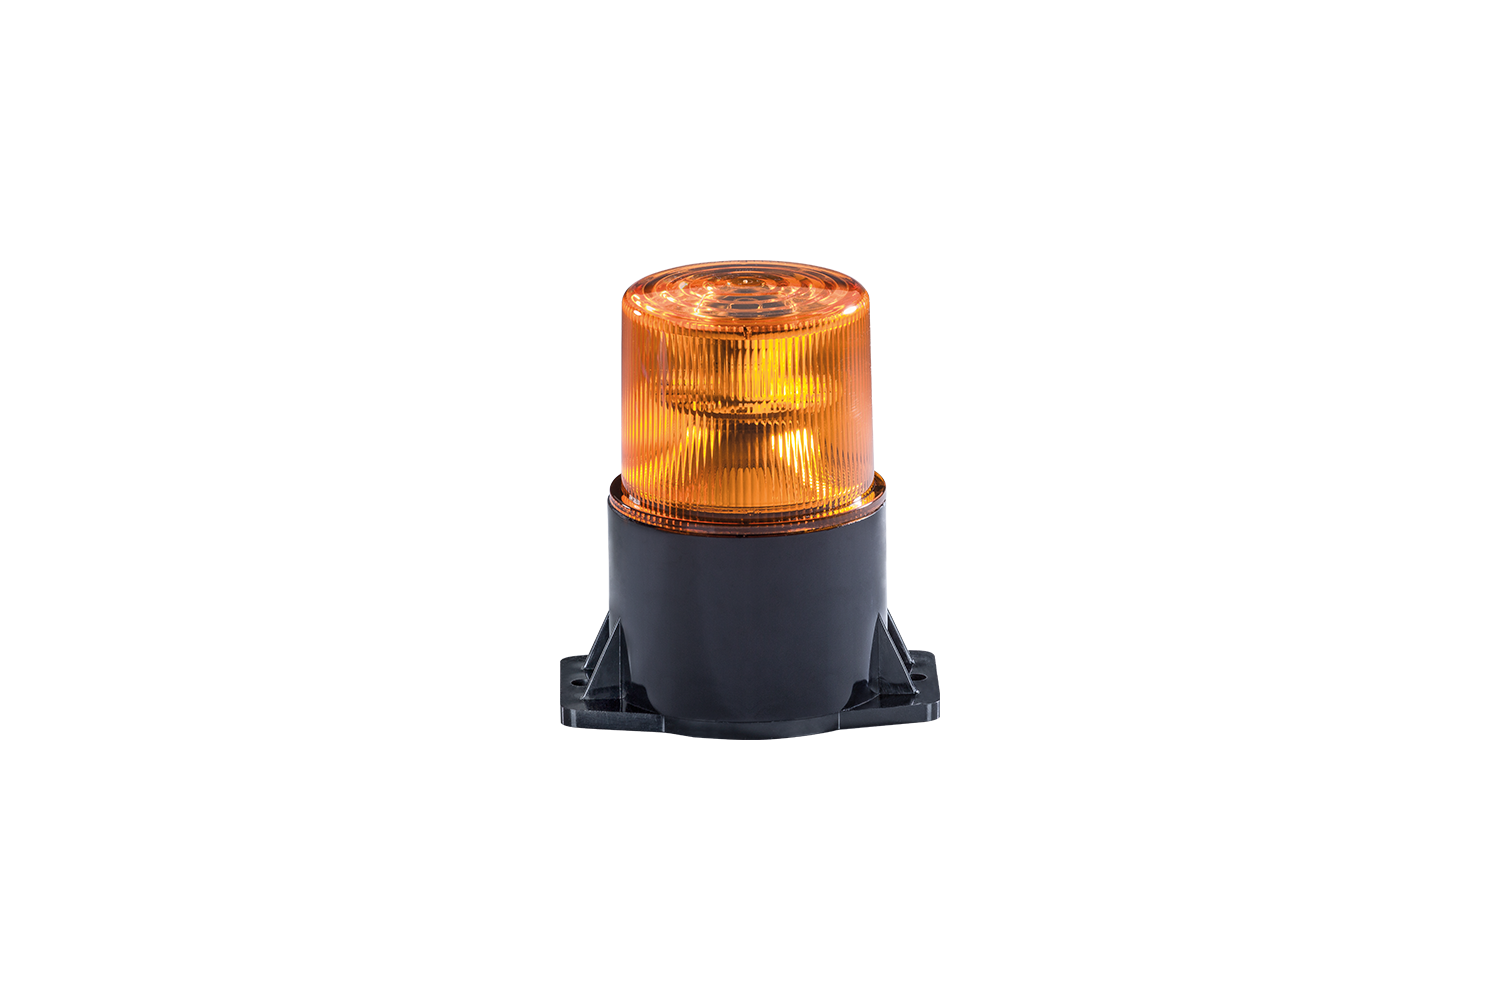 FL Mini warning lamp from Hella offered by Patlon